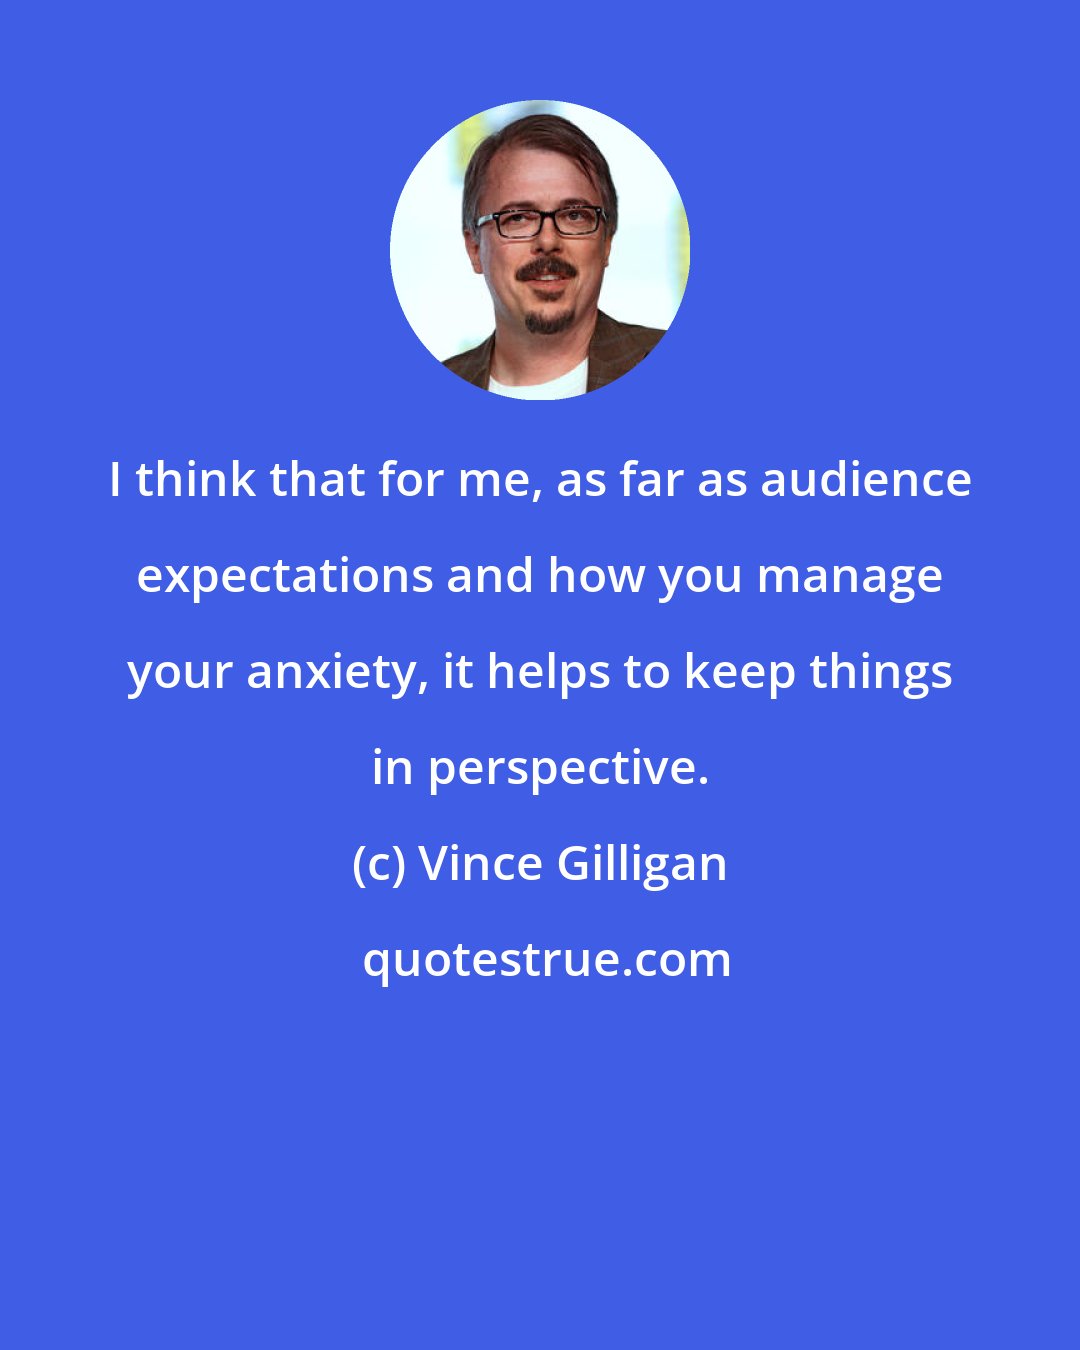 Vince Gilligan: I think that for me, as far as audience expectations and how you manage your anxiety, it helps to keep things in perspective.